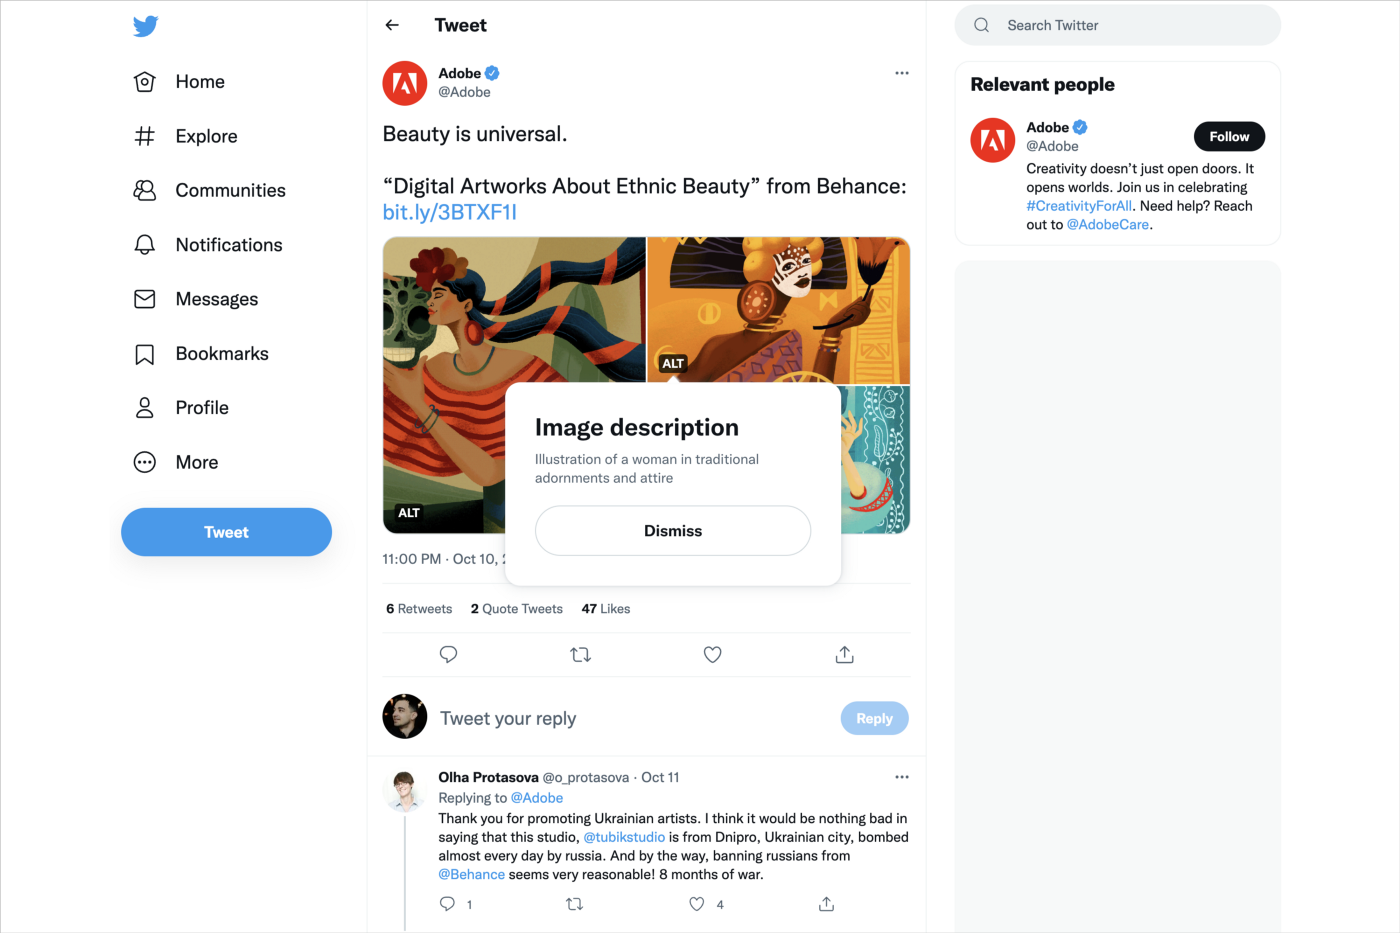 Adobe’s tweet with three images of women in traditional attires and the same generic image descriptions for all three pictures: example 2.